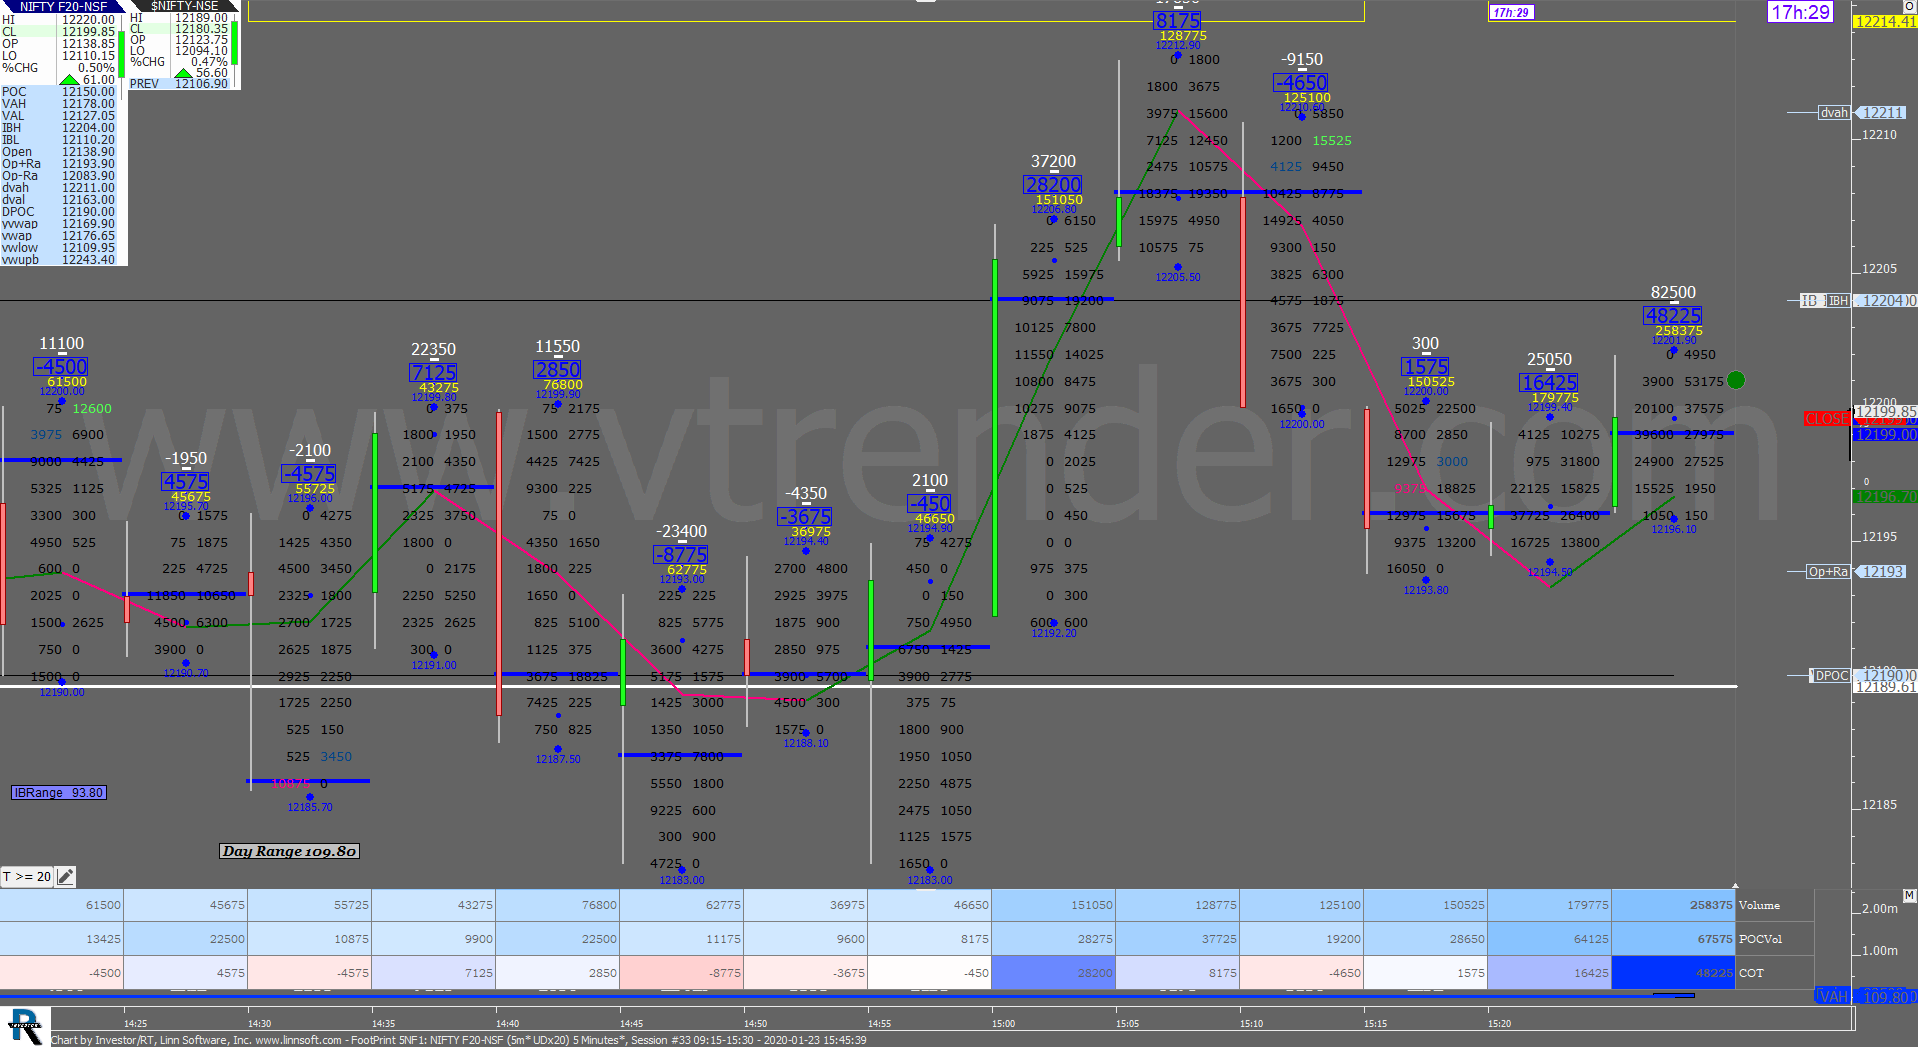 5 30 Order Flow Charts Dated 23Rd Jan 2020 (5 Mins) Banknifty Futures, Day Trading, Intraday Trading, Intraday Trading Strategies, Nifty Futures, Order Flow Analysis, Support And Resistance, Trading Strategies, Volume Profile Trading